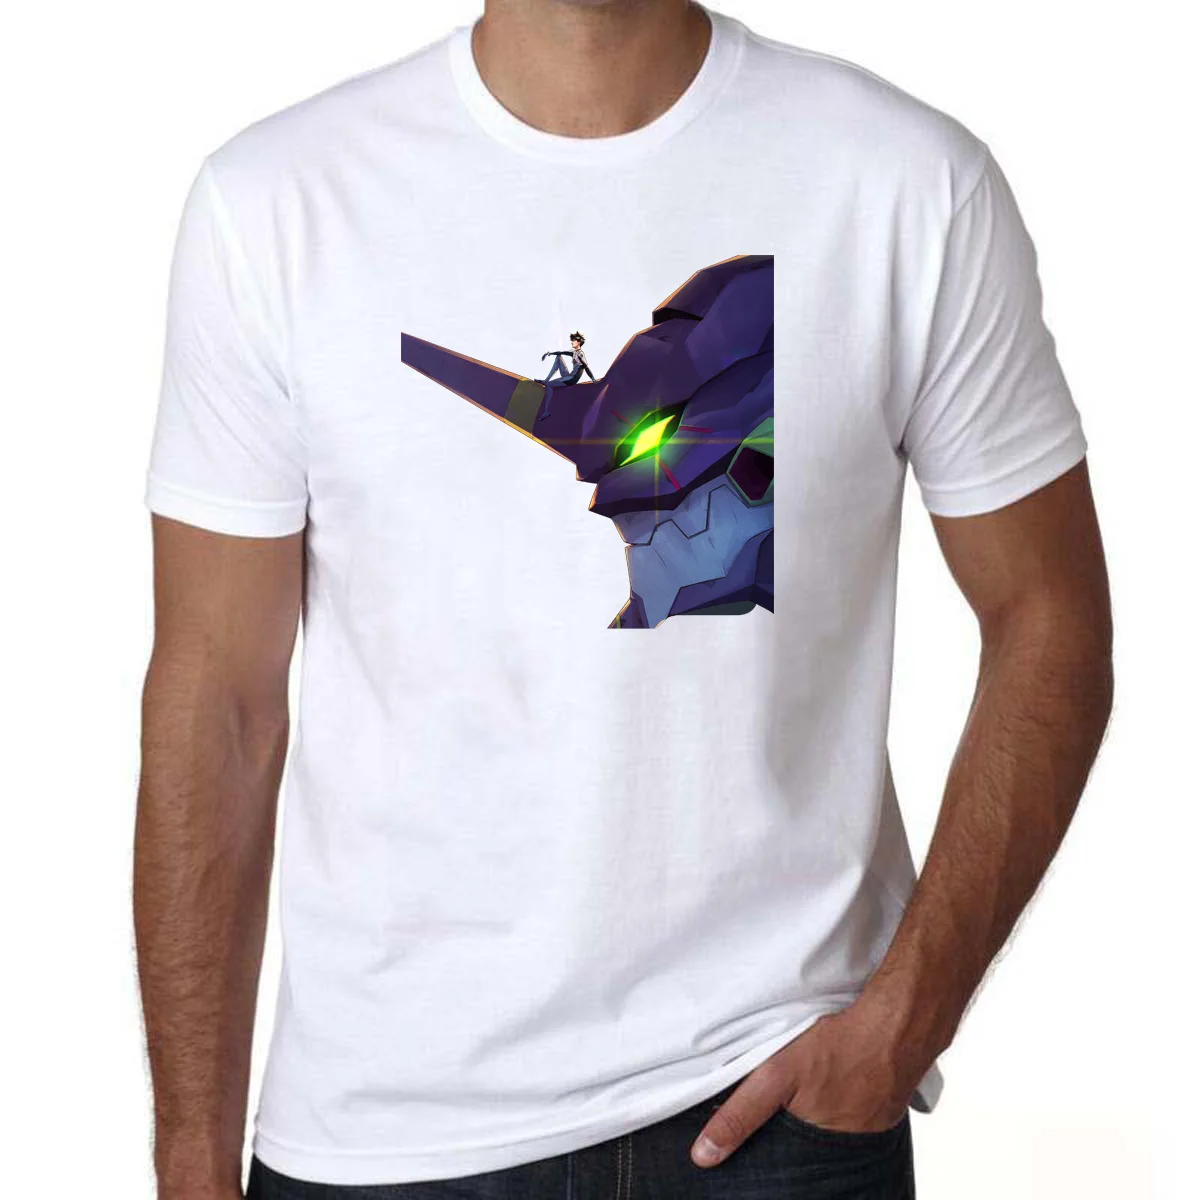 

Hot Anime Evangelion EVA01 Art Print T-shirts Summer Casual Short Sleeve O-neck Cotton Top Tees Fashion Cosplay Shirts For Fans